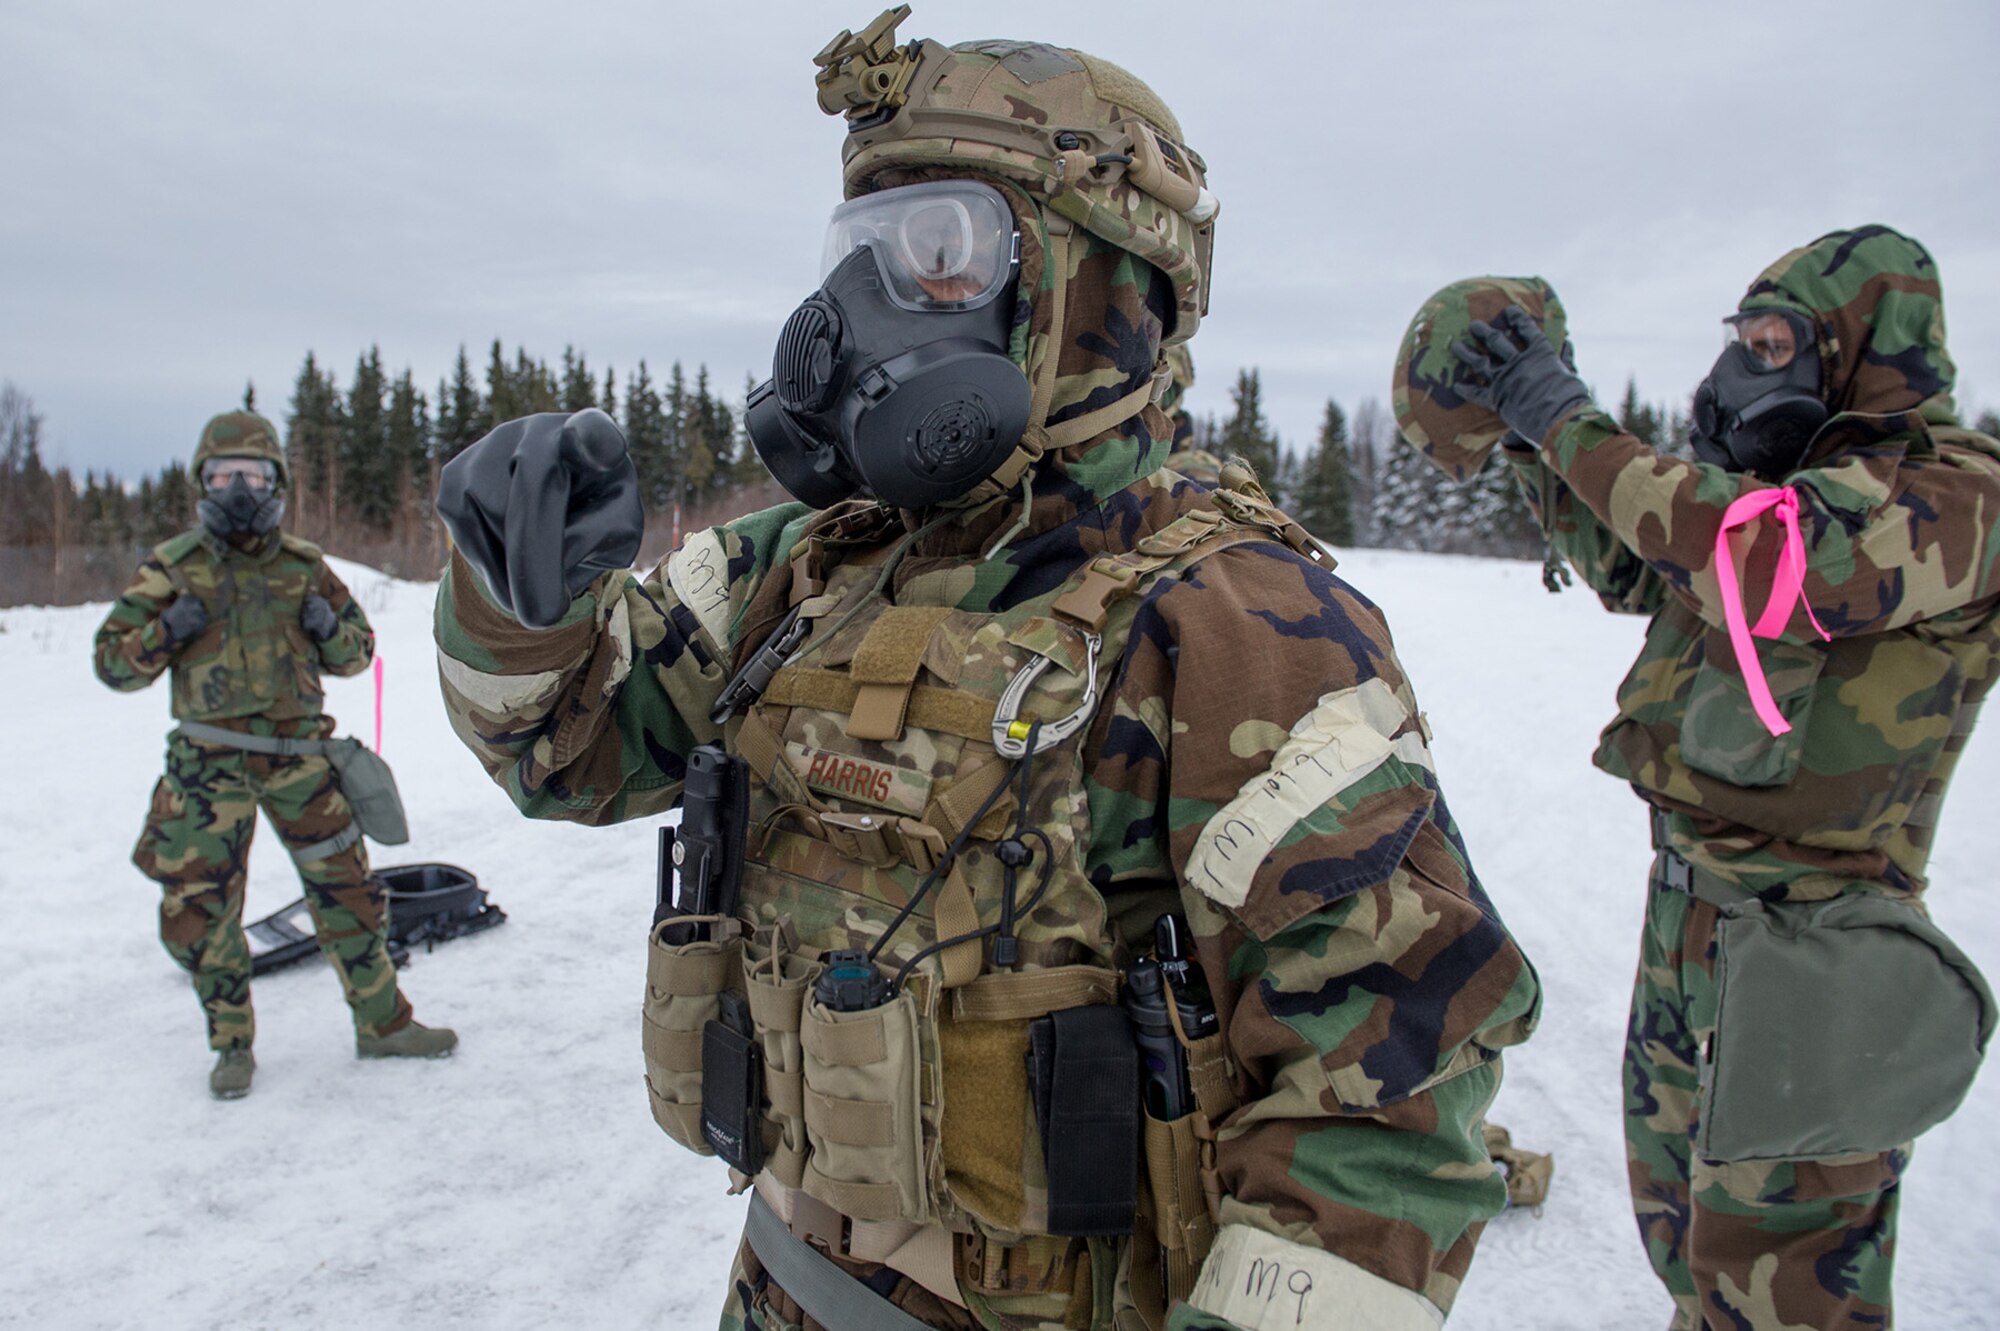 Air Force Staff Sgt. Joshua Harris, assigned to the 673d Civil Engineer Squadron, Explosives Ordinance Disposal Flight, gives instruction to fellow Airmen as they don protective gear before a live-fire demolitions exercise in Mission Oriented Protective Posture 4 on Joint Base Elmendorf-Richardson, Alaska, Feb.14, 2018.  The Airmen were conducting EOD training in a simulated chemical weapons contaminated environment.